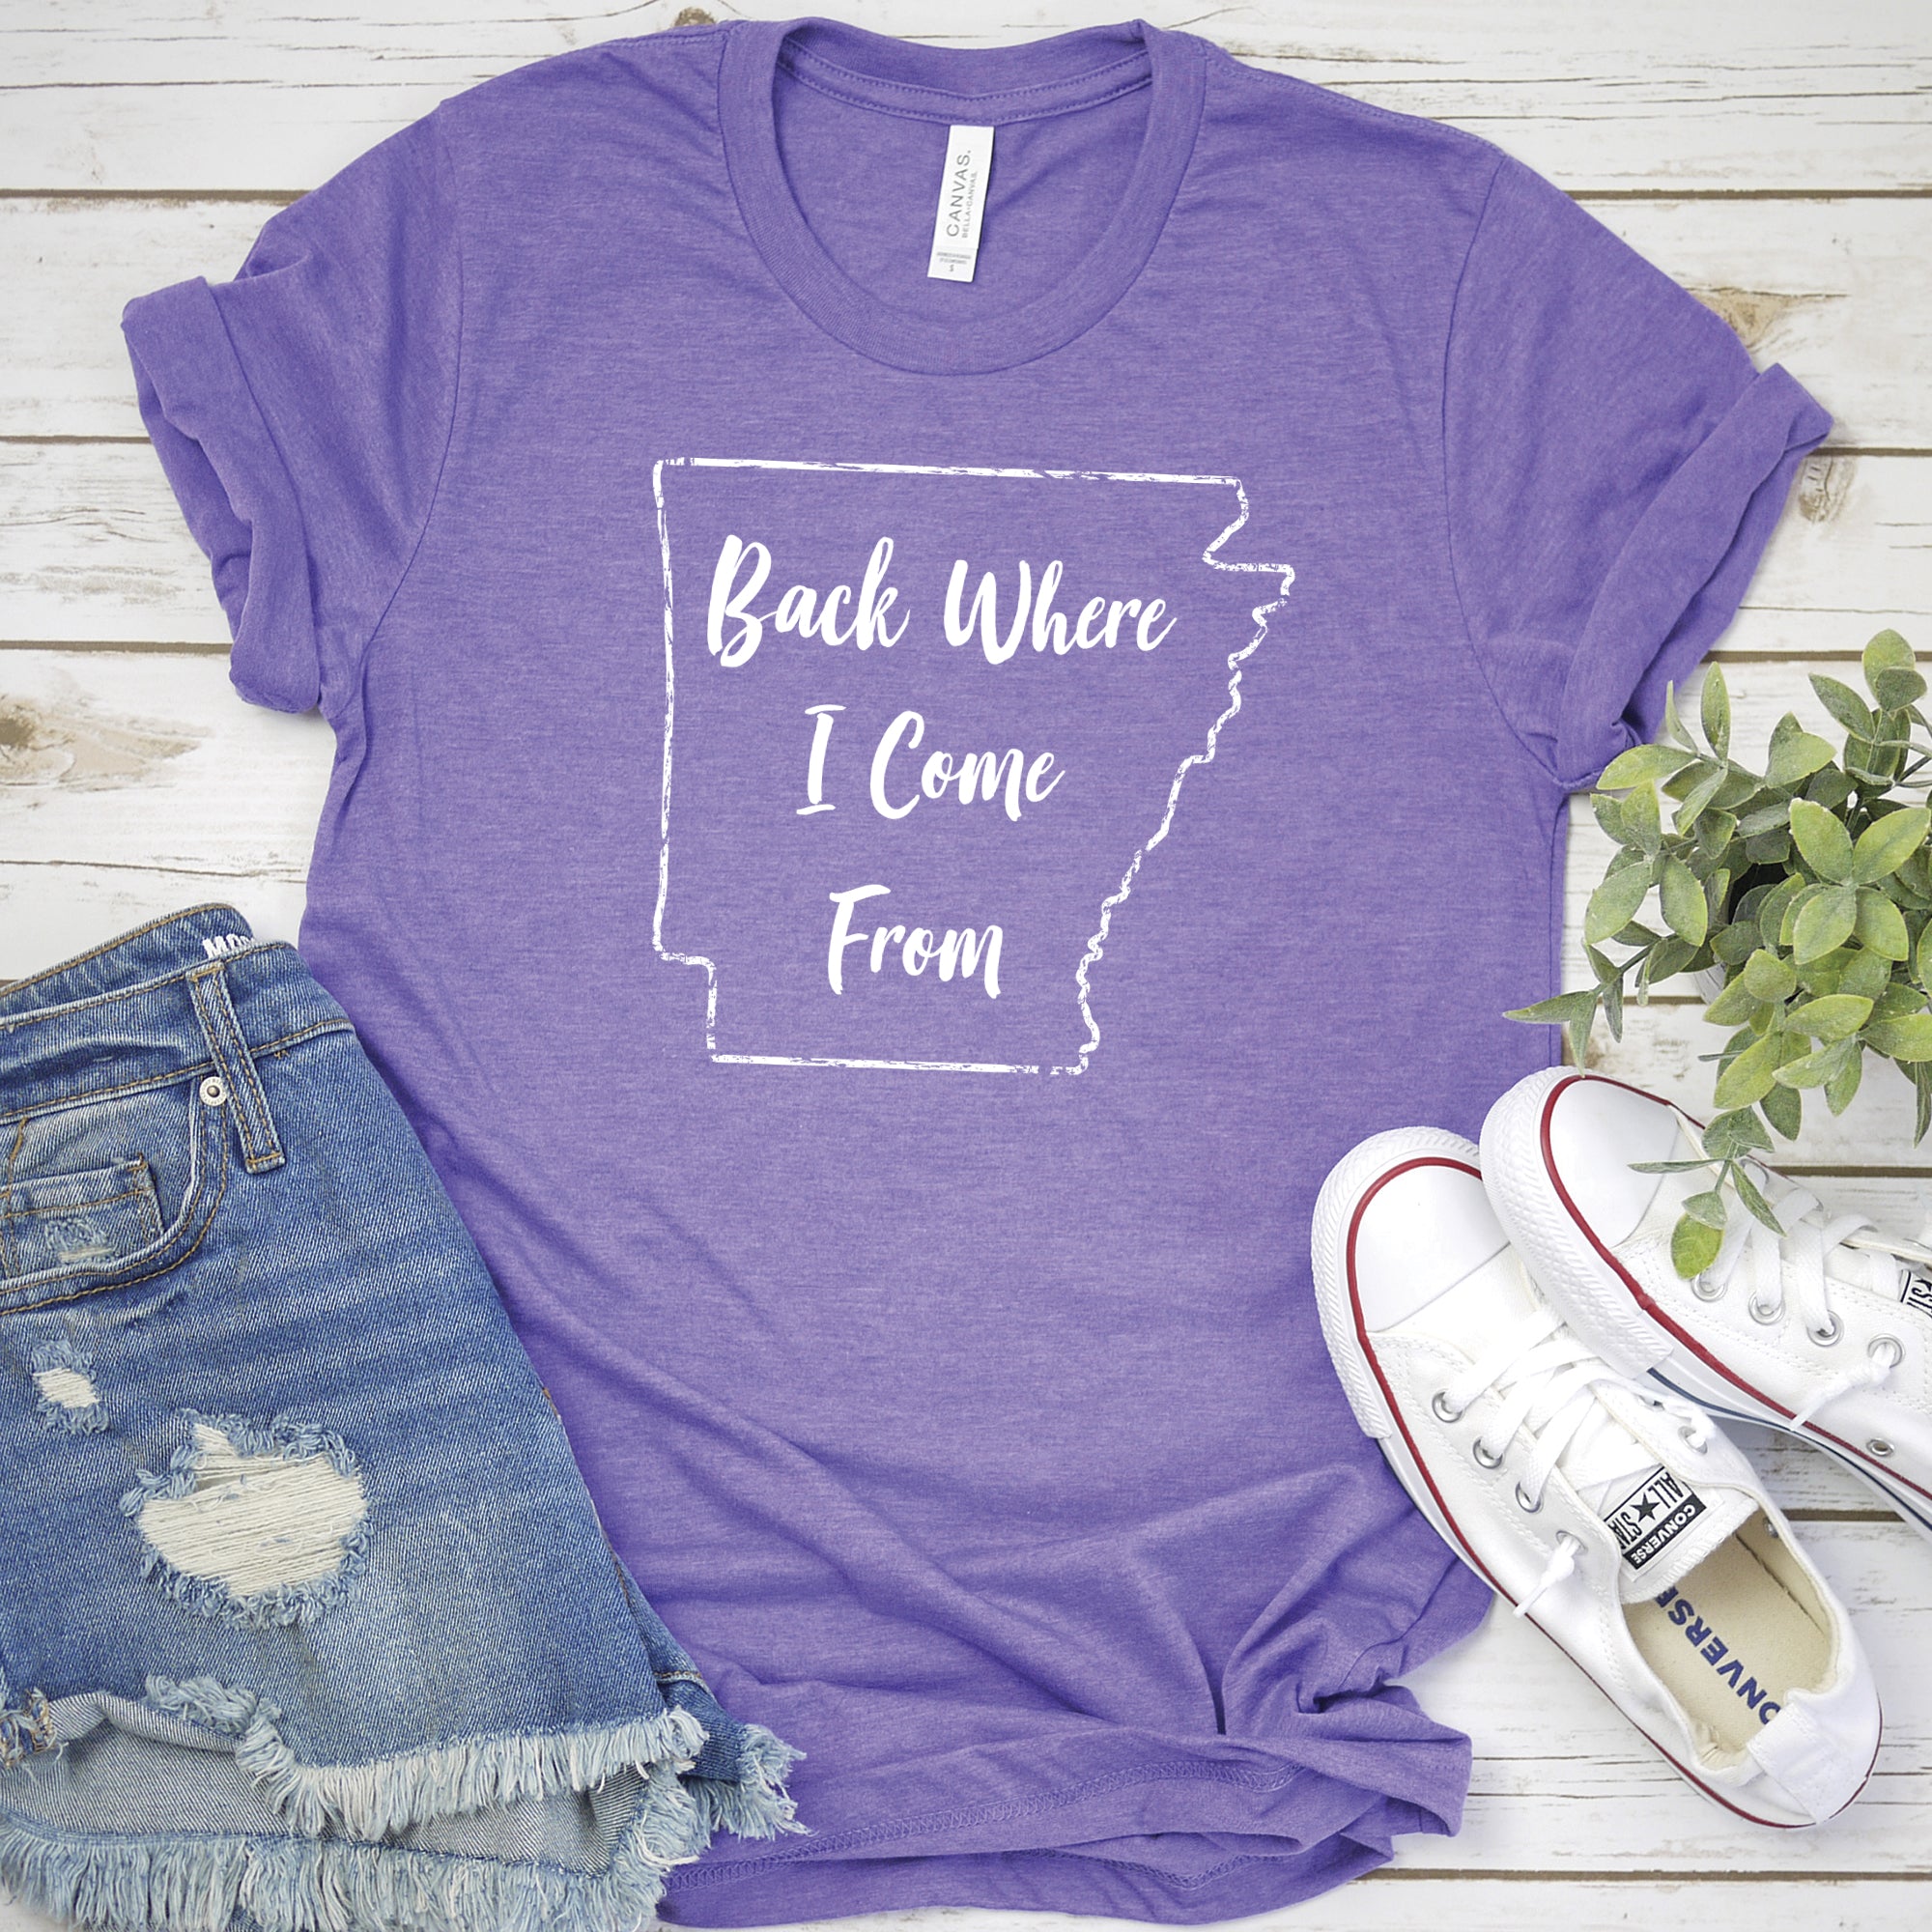 Arkansas - Back Where I Come From